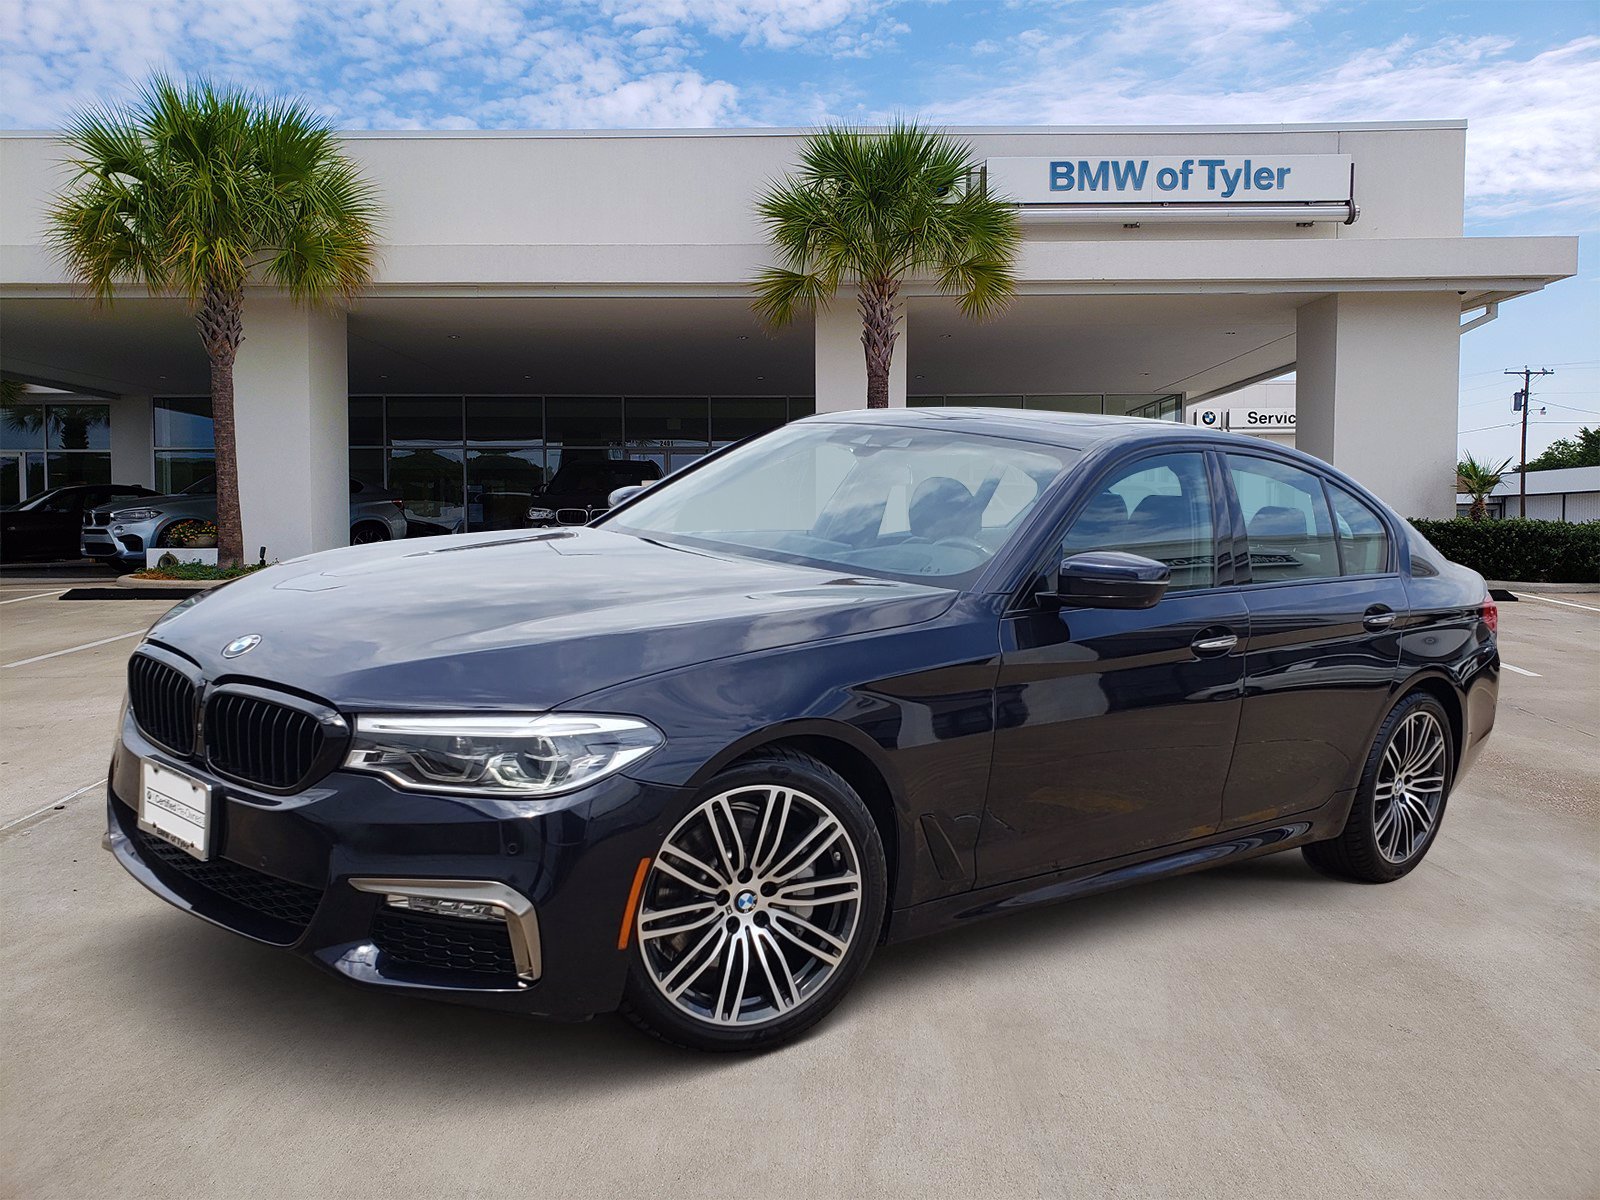 Certified Pre-Owned 2017 BMW 5 Series 540i 4dr Car in Fayetteville #